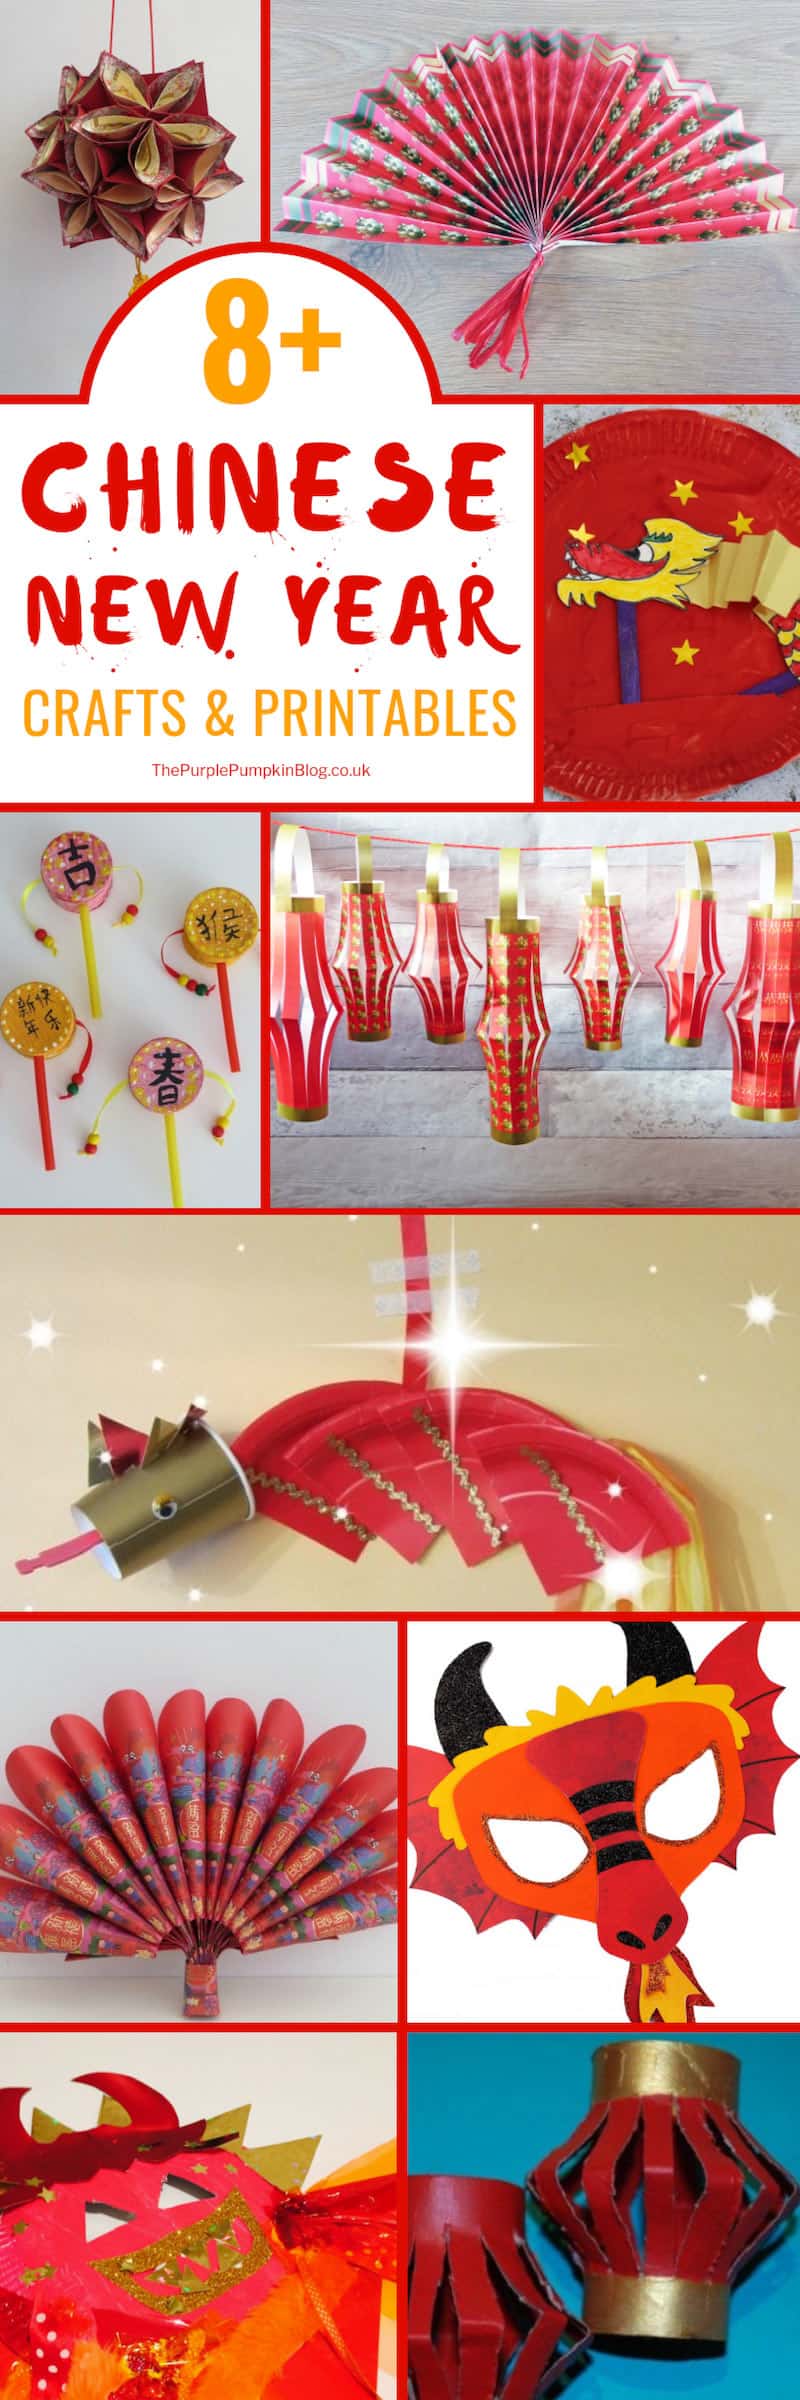 An awesome selection of Chinese New Year Crafts & Printables for kids and adults.